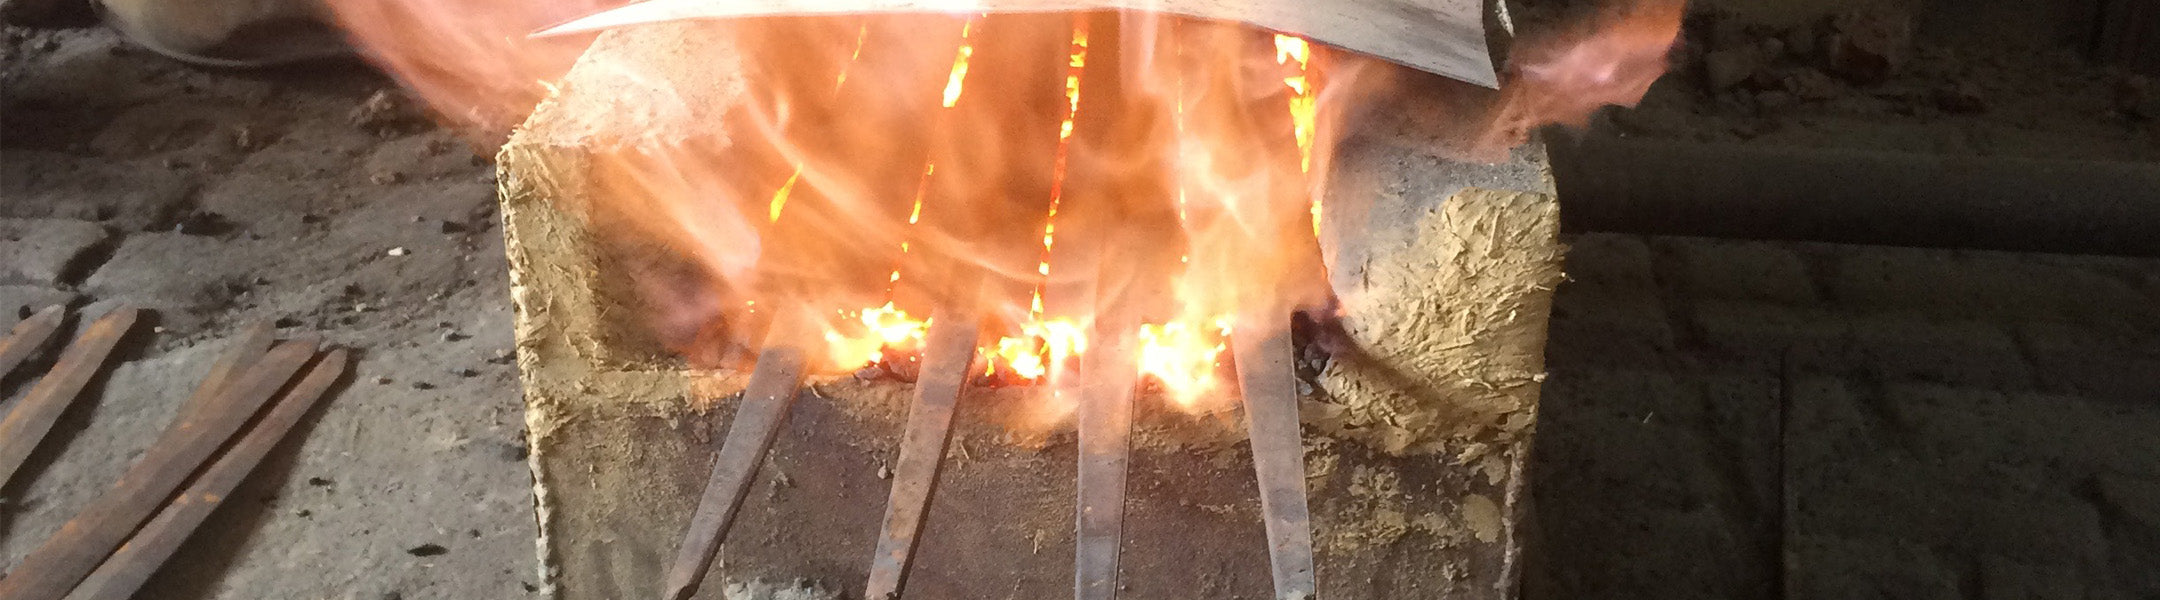 sword blades in a hardening oven. Flames are coming out and surrounding the metal